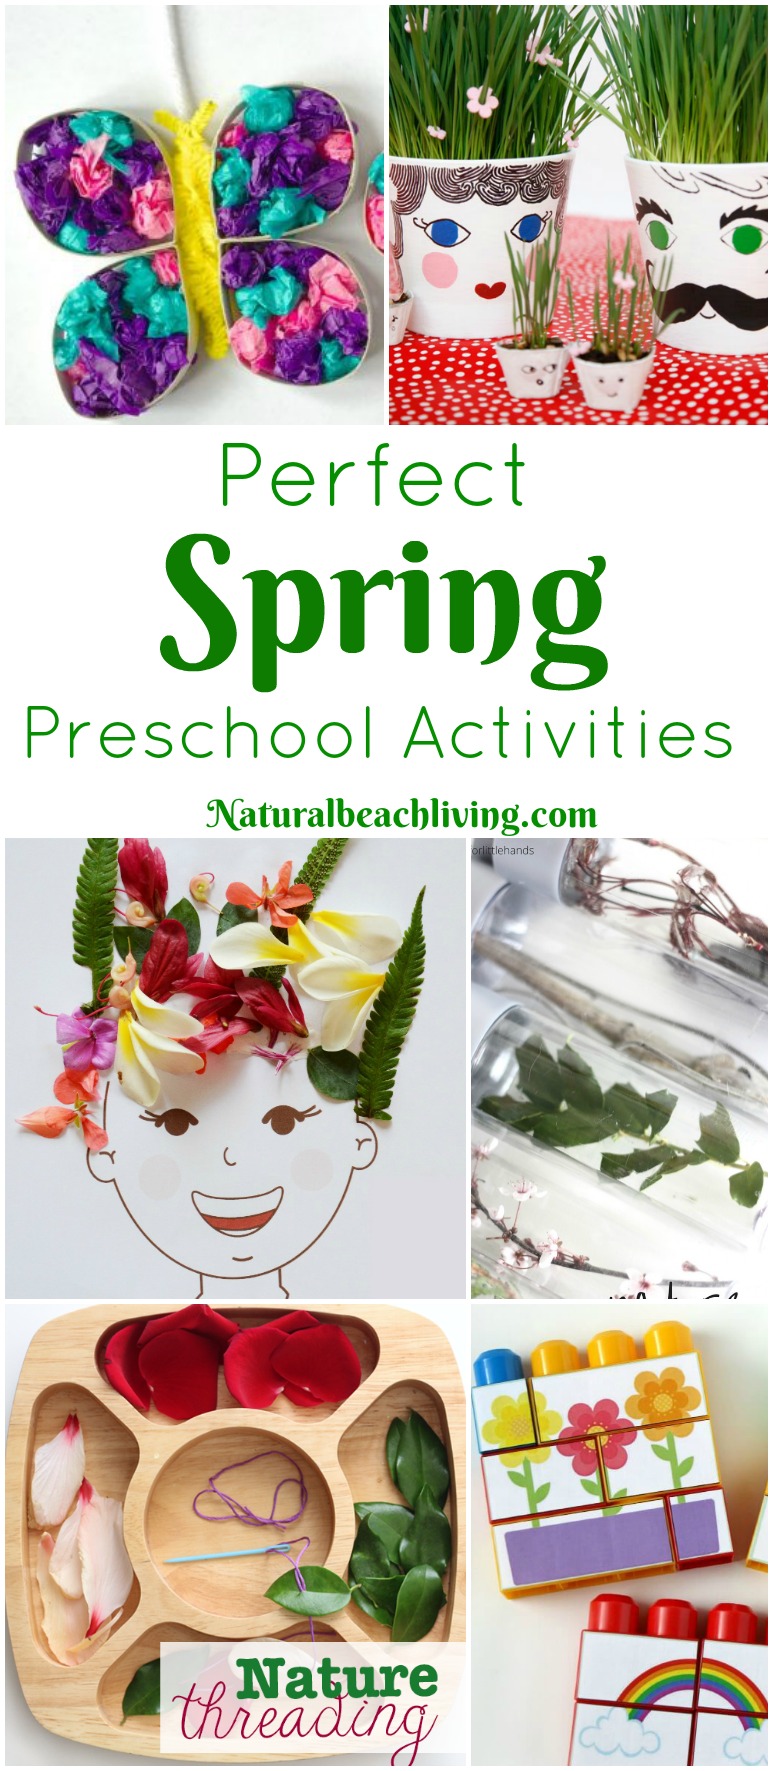 The Ultimate Guide for the Best Spring Activities, Grab your Free Spring Bucket List Printable. Spring Activities for Kids and Adults! Plus, We have the best Spring Activities for Families, Outdoor Activities for Kids, Nature Activities for Springtime, and over 100 more things to do this spring